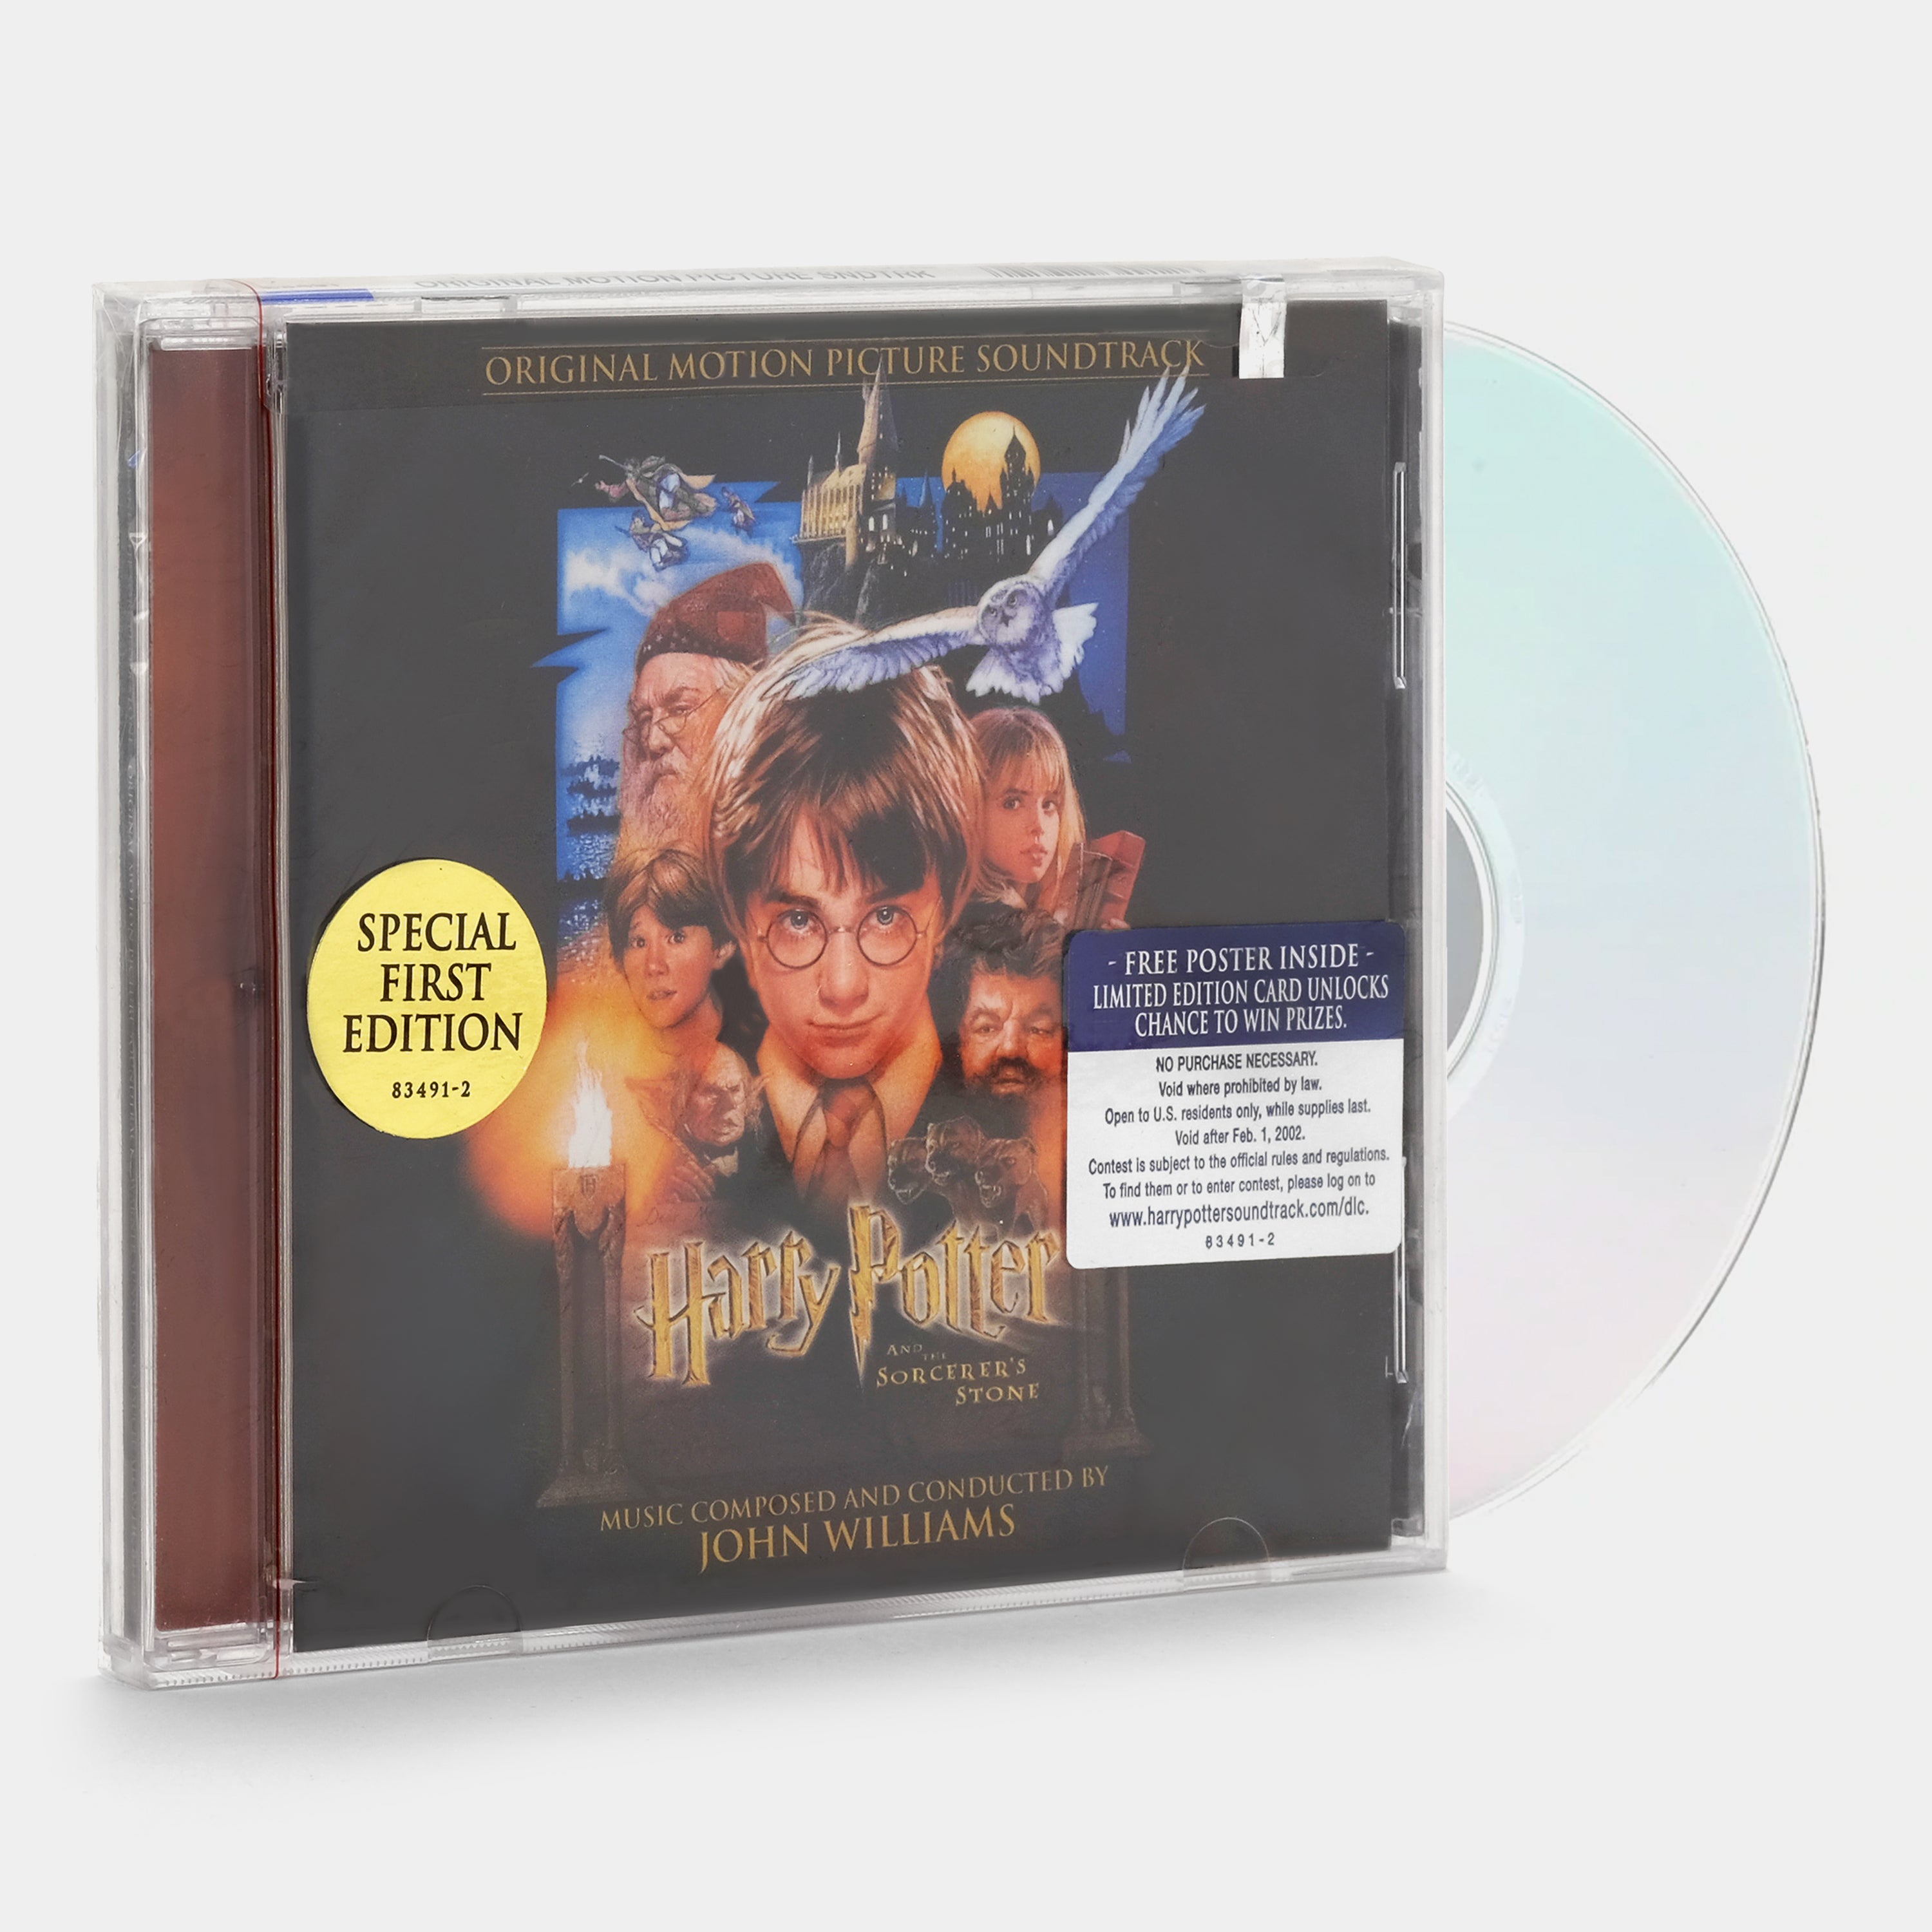 John Williams - Harry Potter And The Sorcerer's Stone (Original Motion Picture Soundtrack) CD (Sealed)